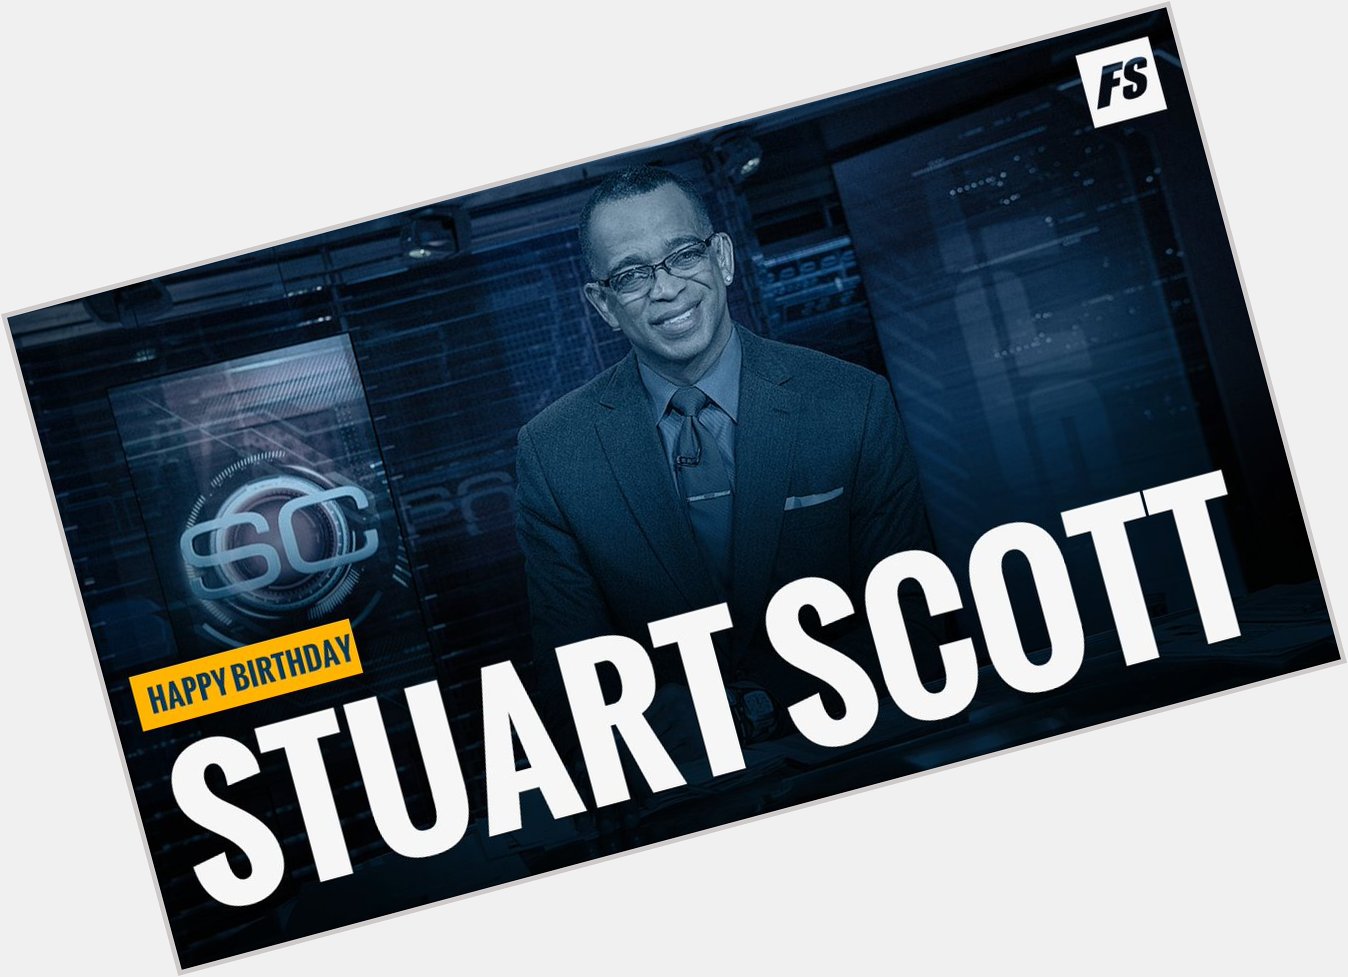 Today would have been Stuart Scott s 53rd birthday. Cooler than the other side of the pillow, happy birthday Stuart. 